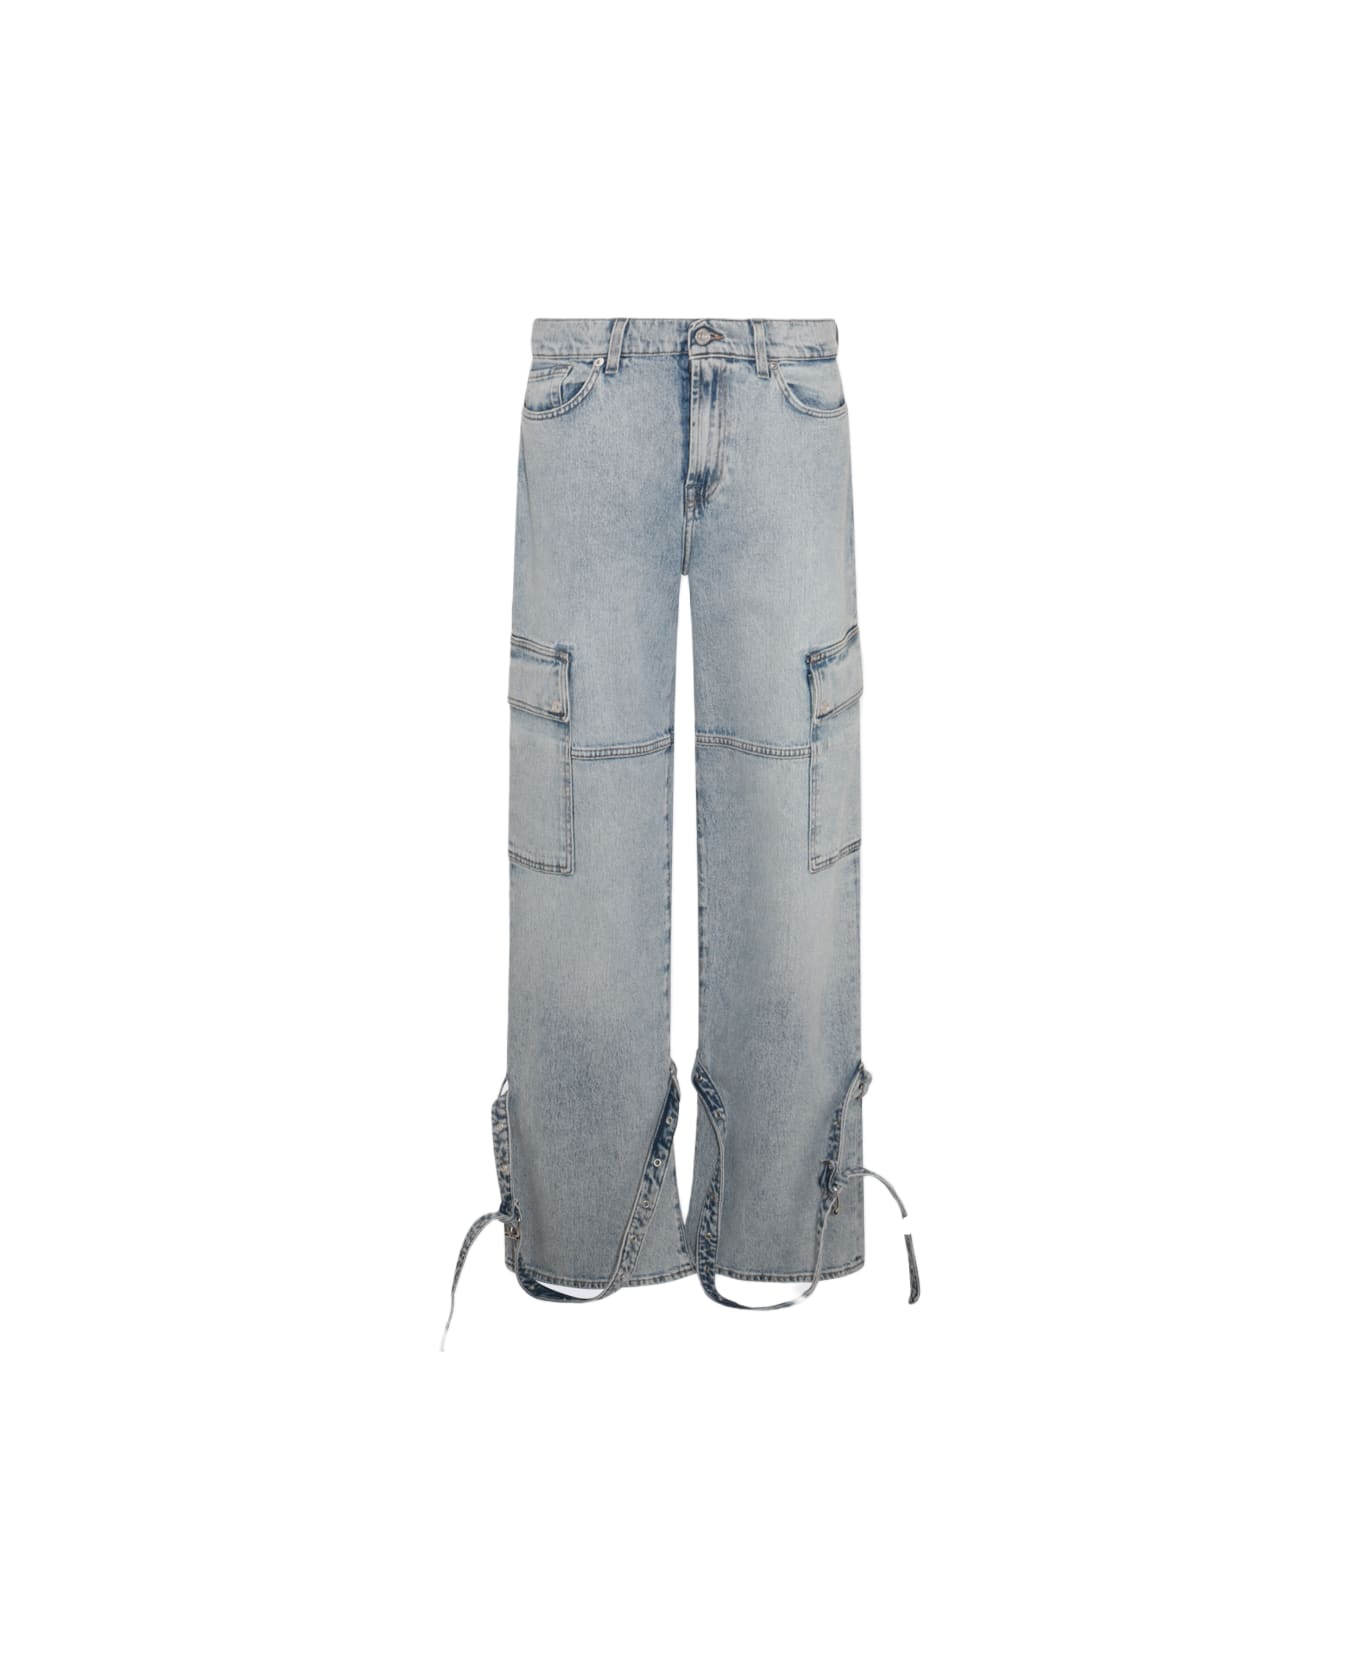 7 For All Mankind Light Blue Cotton Jeans - ARTIC